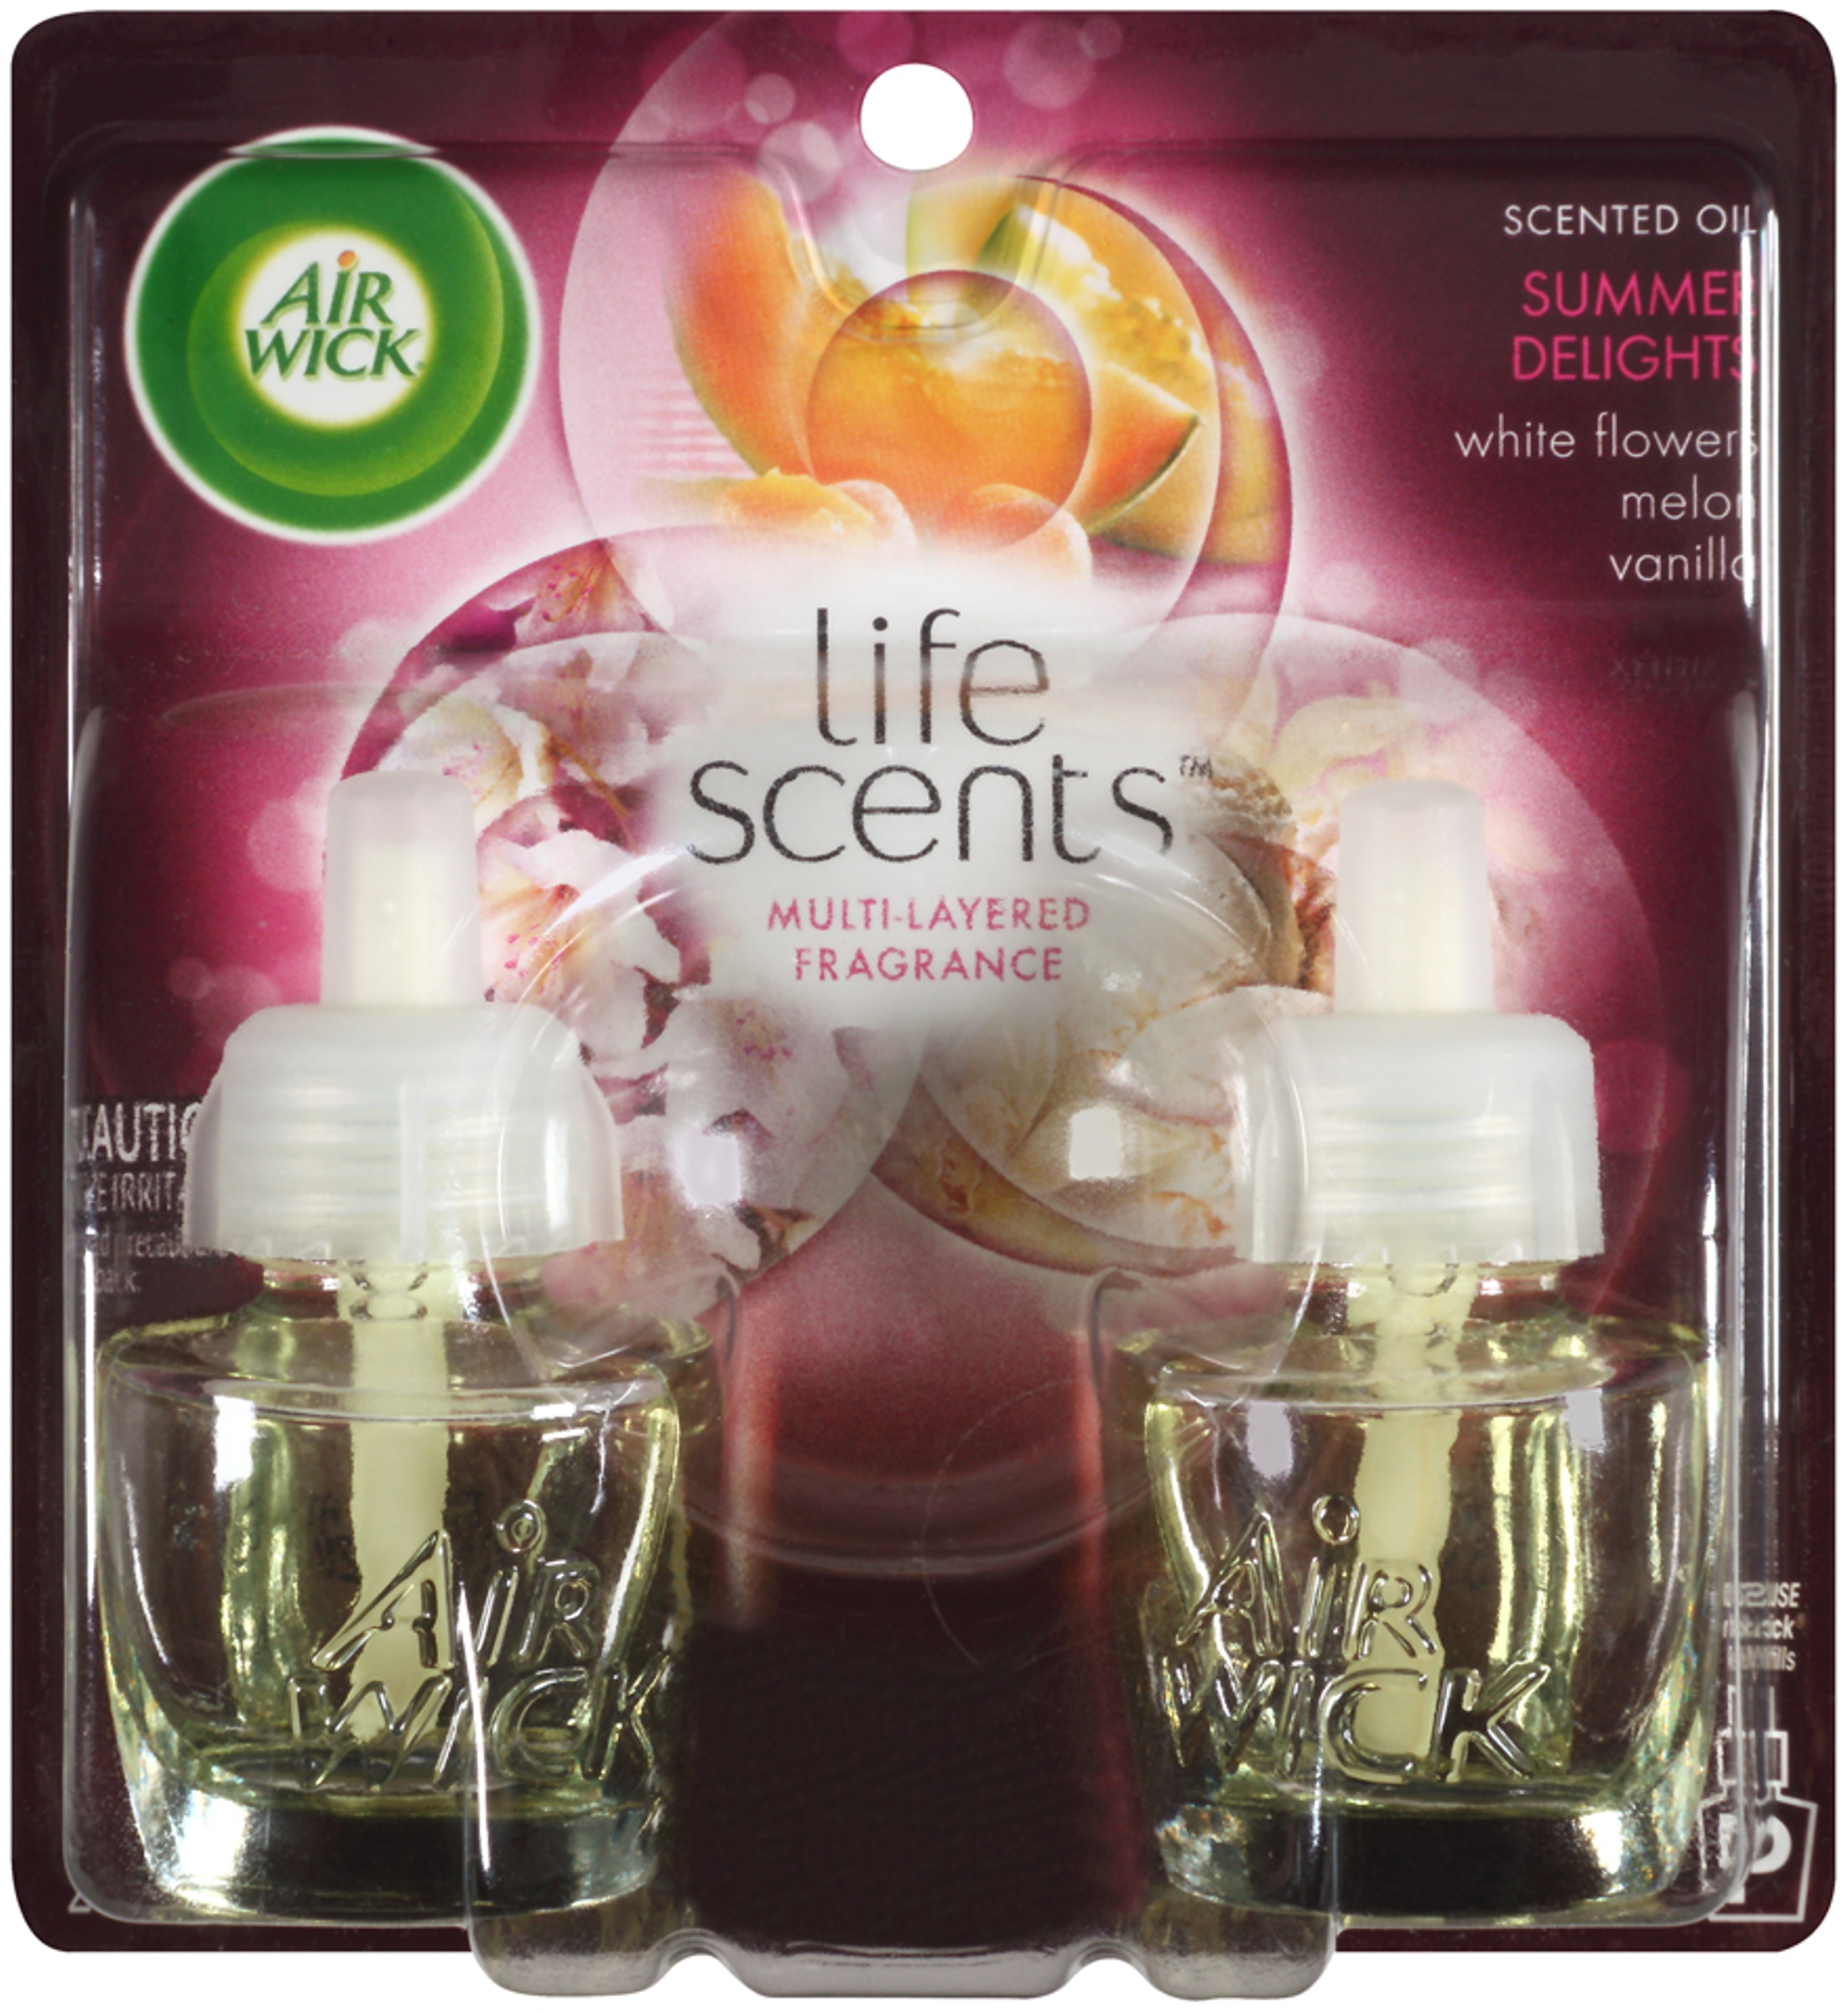 Airwick Life Scents Scented Oil Refills, Scented Oil Refills, Summer Delights, 2 - 0.67 fl oz (20 ml) refills [1.34 fl oz (40 ml)